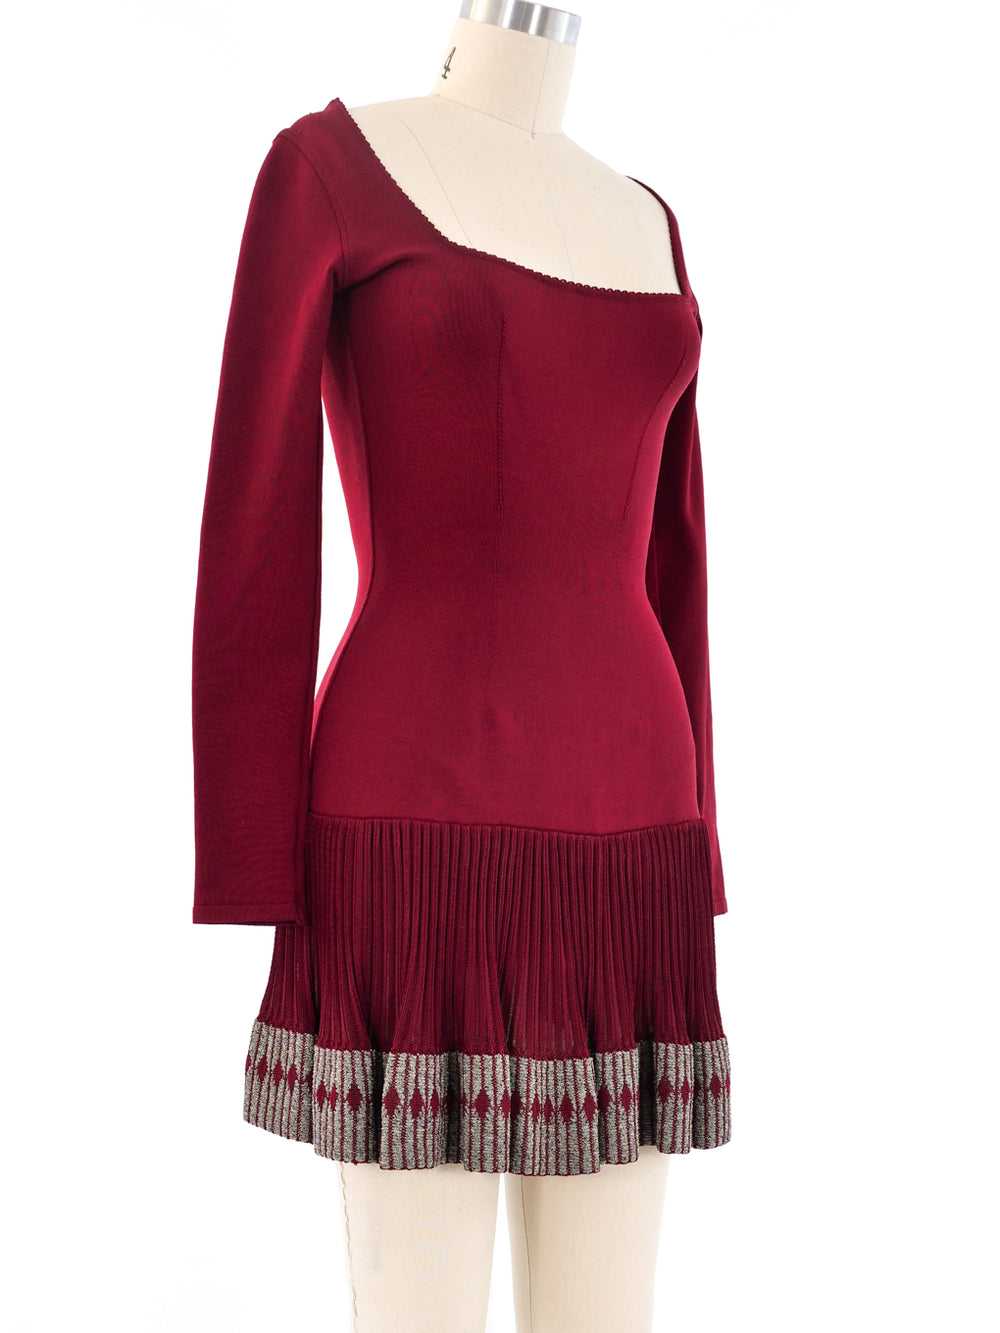 Alaia Cranberry Fit and Flare Ruffle Dress - image 5